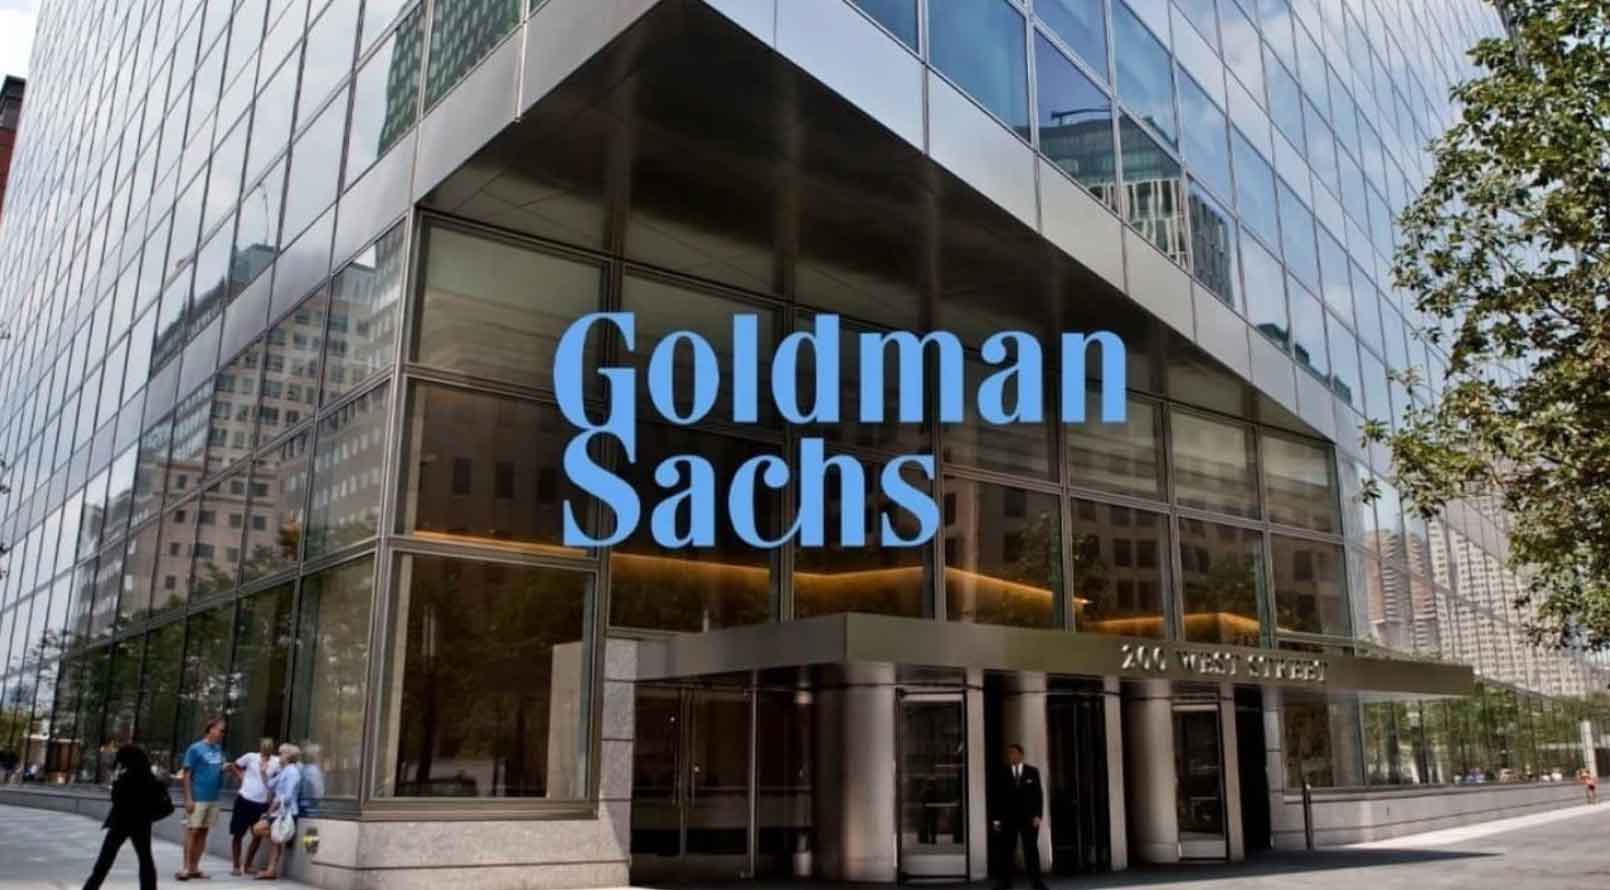 Goldman Sachs is hiring experienced tech professionals across India